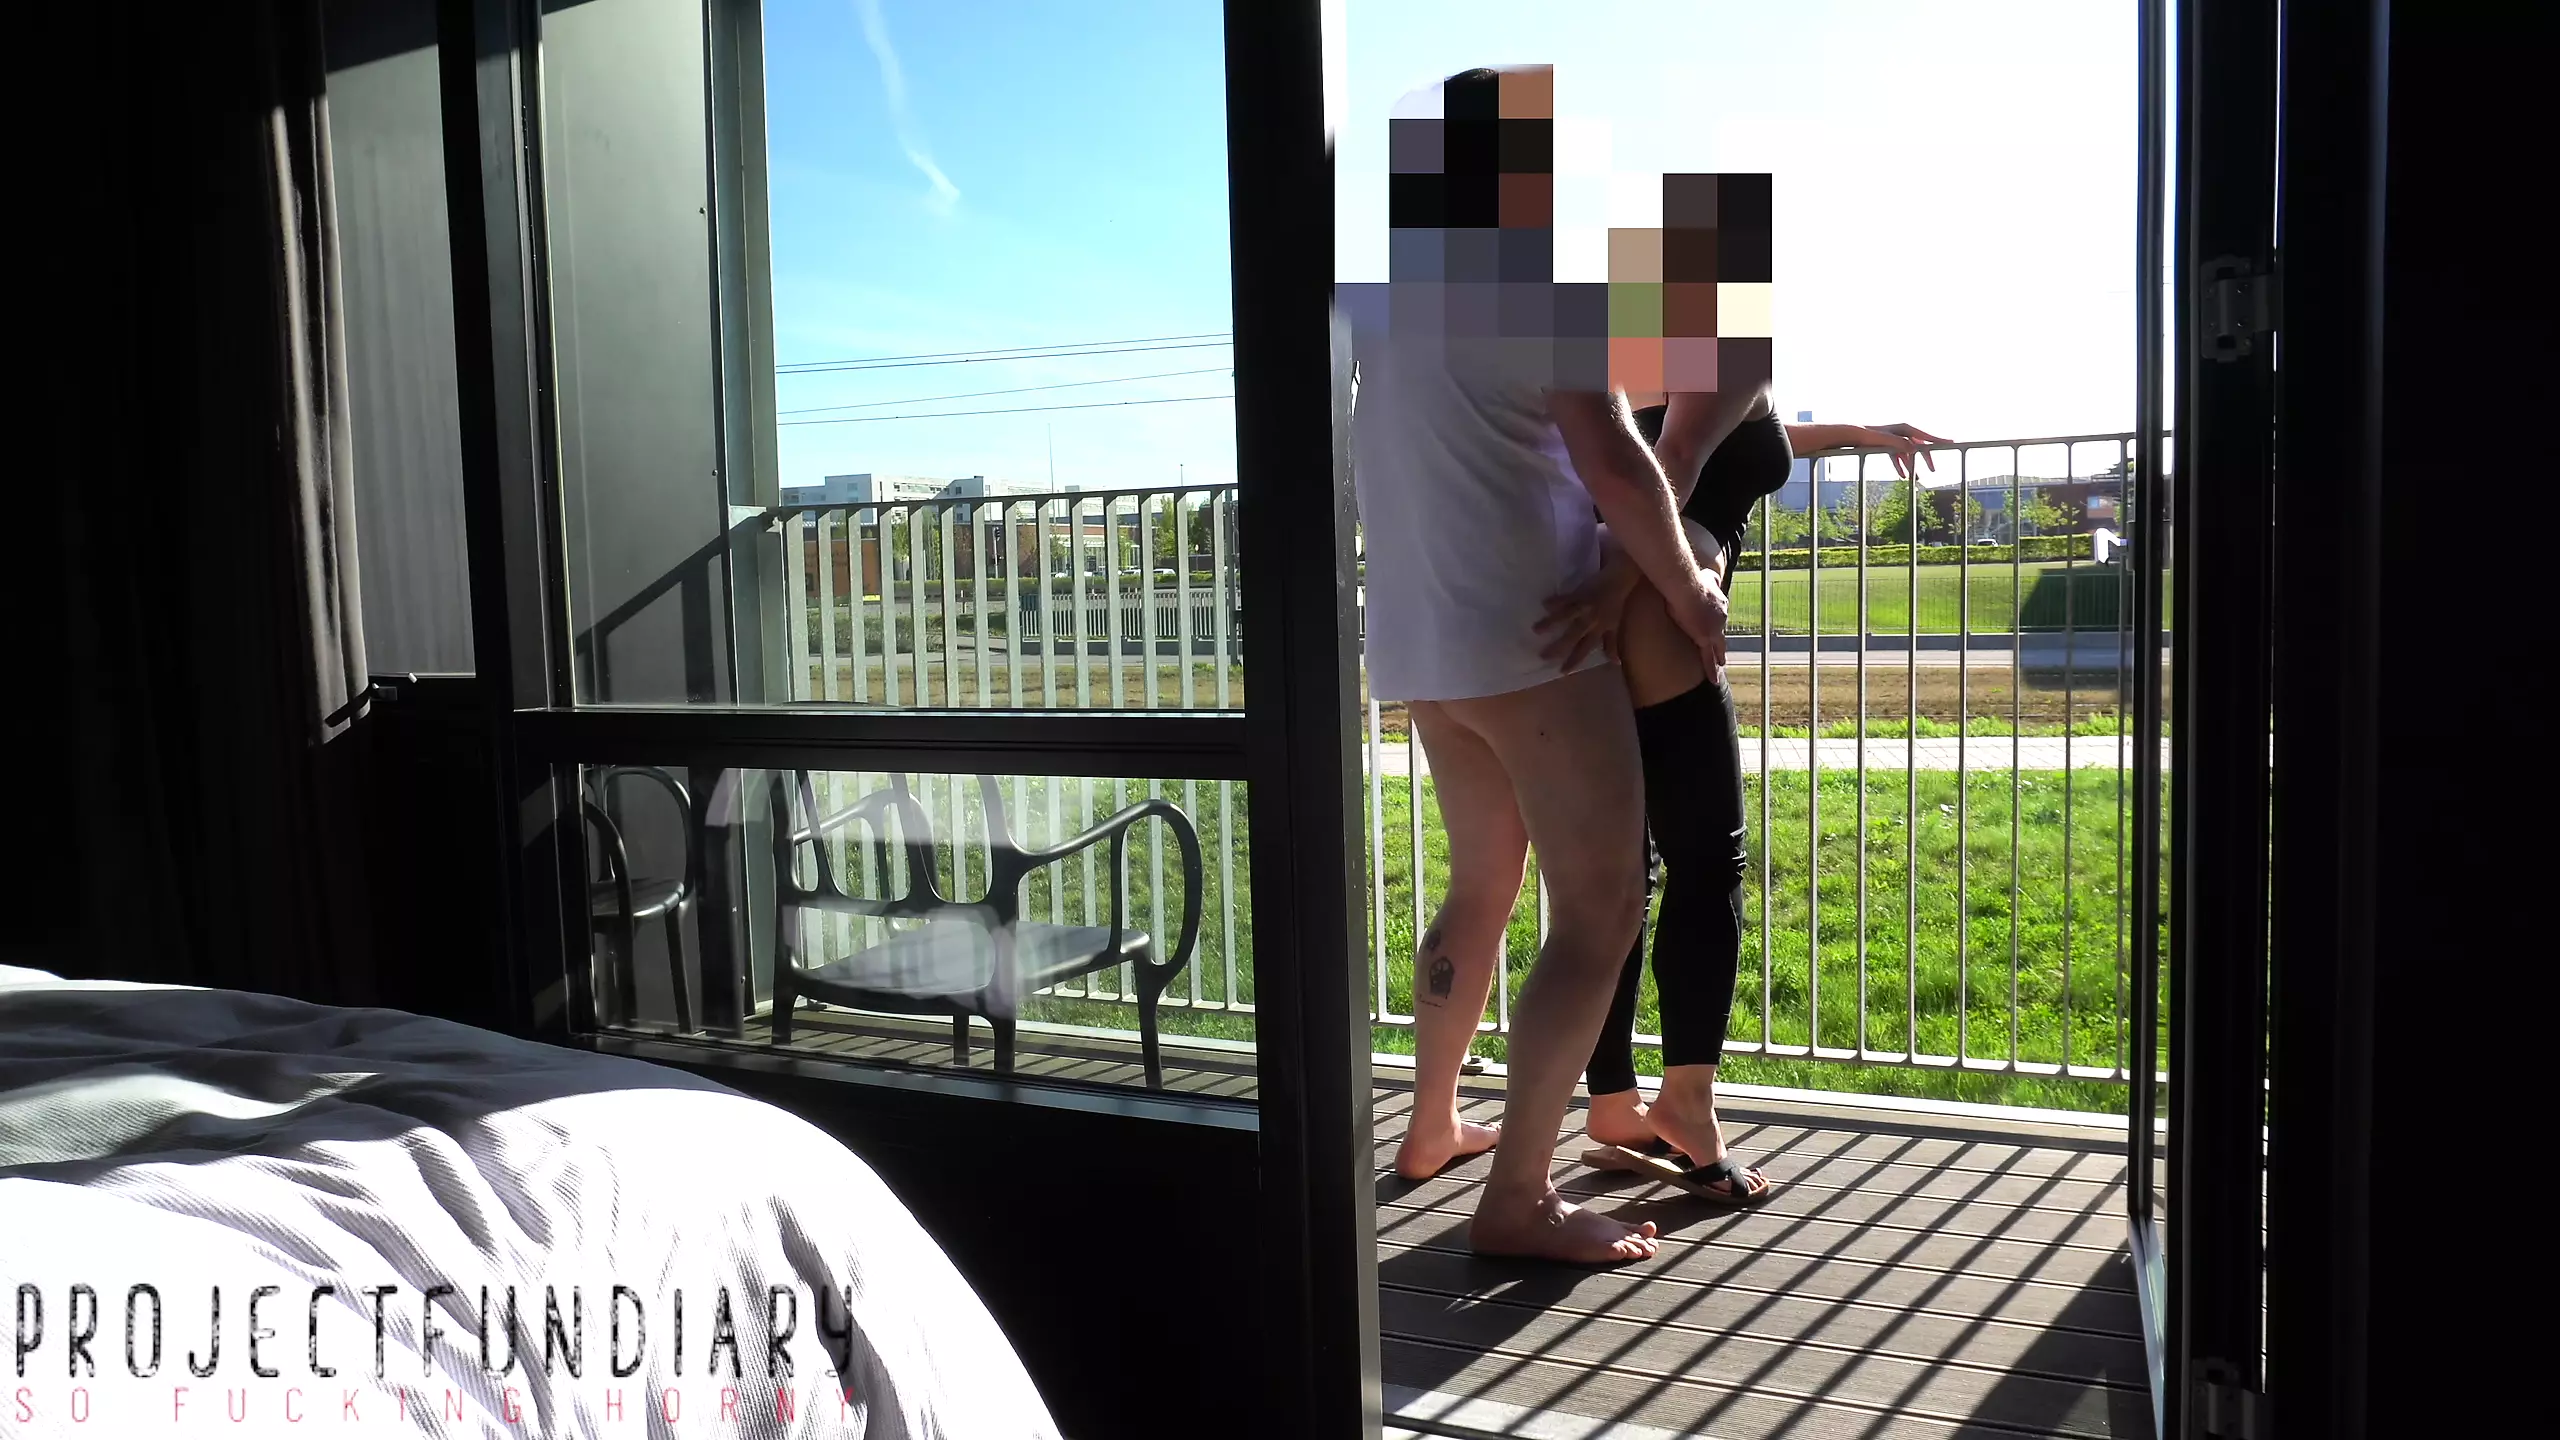 risky public balcony sex with people watching